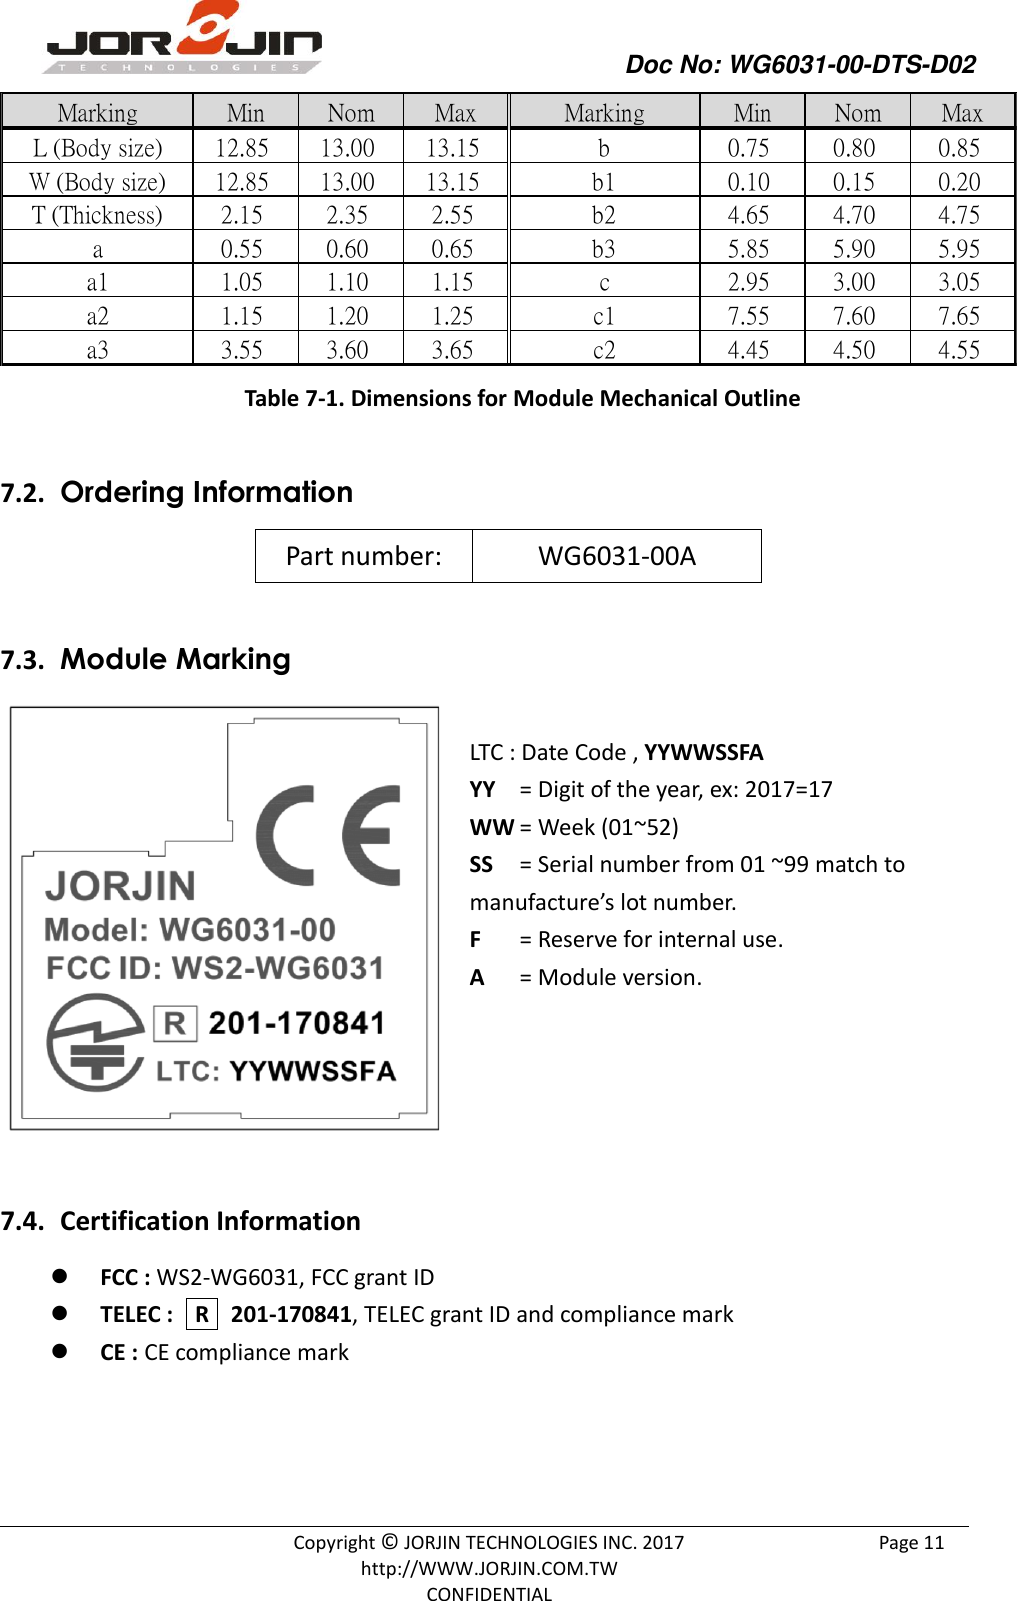                Doc No: WG6031-00-DTS-D02                                                                                               Copyright © JORJIN TECHNOLOGIES INC. 2017 http://WWW.JORJIN.COM.TW CONFIDENTIAL Page 11 Marking Min Nom Max Marking Min Nom MaxL (Body size) 12.85 13.00 13.15 b 0.75 0.80 0.85W (Body size) 12.85 13.00 13.15 b1 0.10 0.15 0.20T (Thickness) 2.15 2.35 2.55 b2 4.65 4.70 4.75a 0.55 0.60 0.65 b3 5.85 5.90 5.95a1 1.05 1.10 1.15 c 2.95 3.00 3.05a2 1.15 1.20 1.25 c1 7.55 7.60 7.65a3 3.55 3.60 3.65 c2 4.45 4.50 4.55 Table 7-1. Dimensions for Module Mechanical Outline  7.2.  Ordering Information Part number: WG6031-00A  7.3.  Module Marking  LTC : Date Code , YYWWSSFA YY  = Digit of the year, ex: 2017=17 WW = Week (01~52) SS  = Serial number from 01 ~99 match to manufacture’s lot number. F  = Reserve for internal use. A  = Module version.      7.4.  Certification Information  FCC : WS2-WG6031, FCC grant ID  TELEC :   R  201-170841, TELEC grant ID and compliance mark  CE : CE compliance mark    